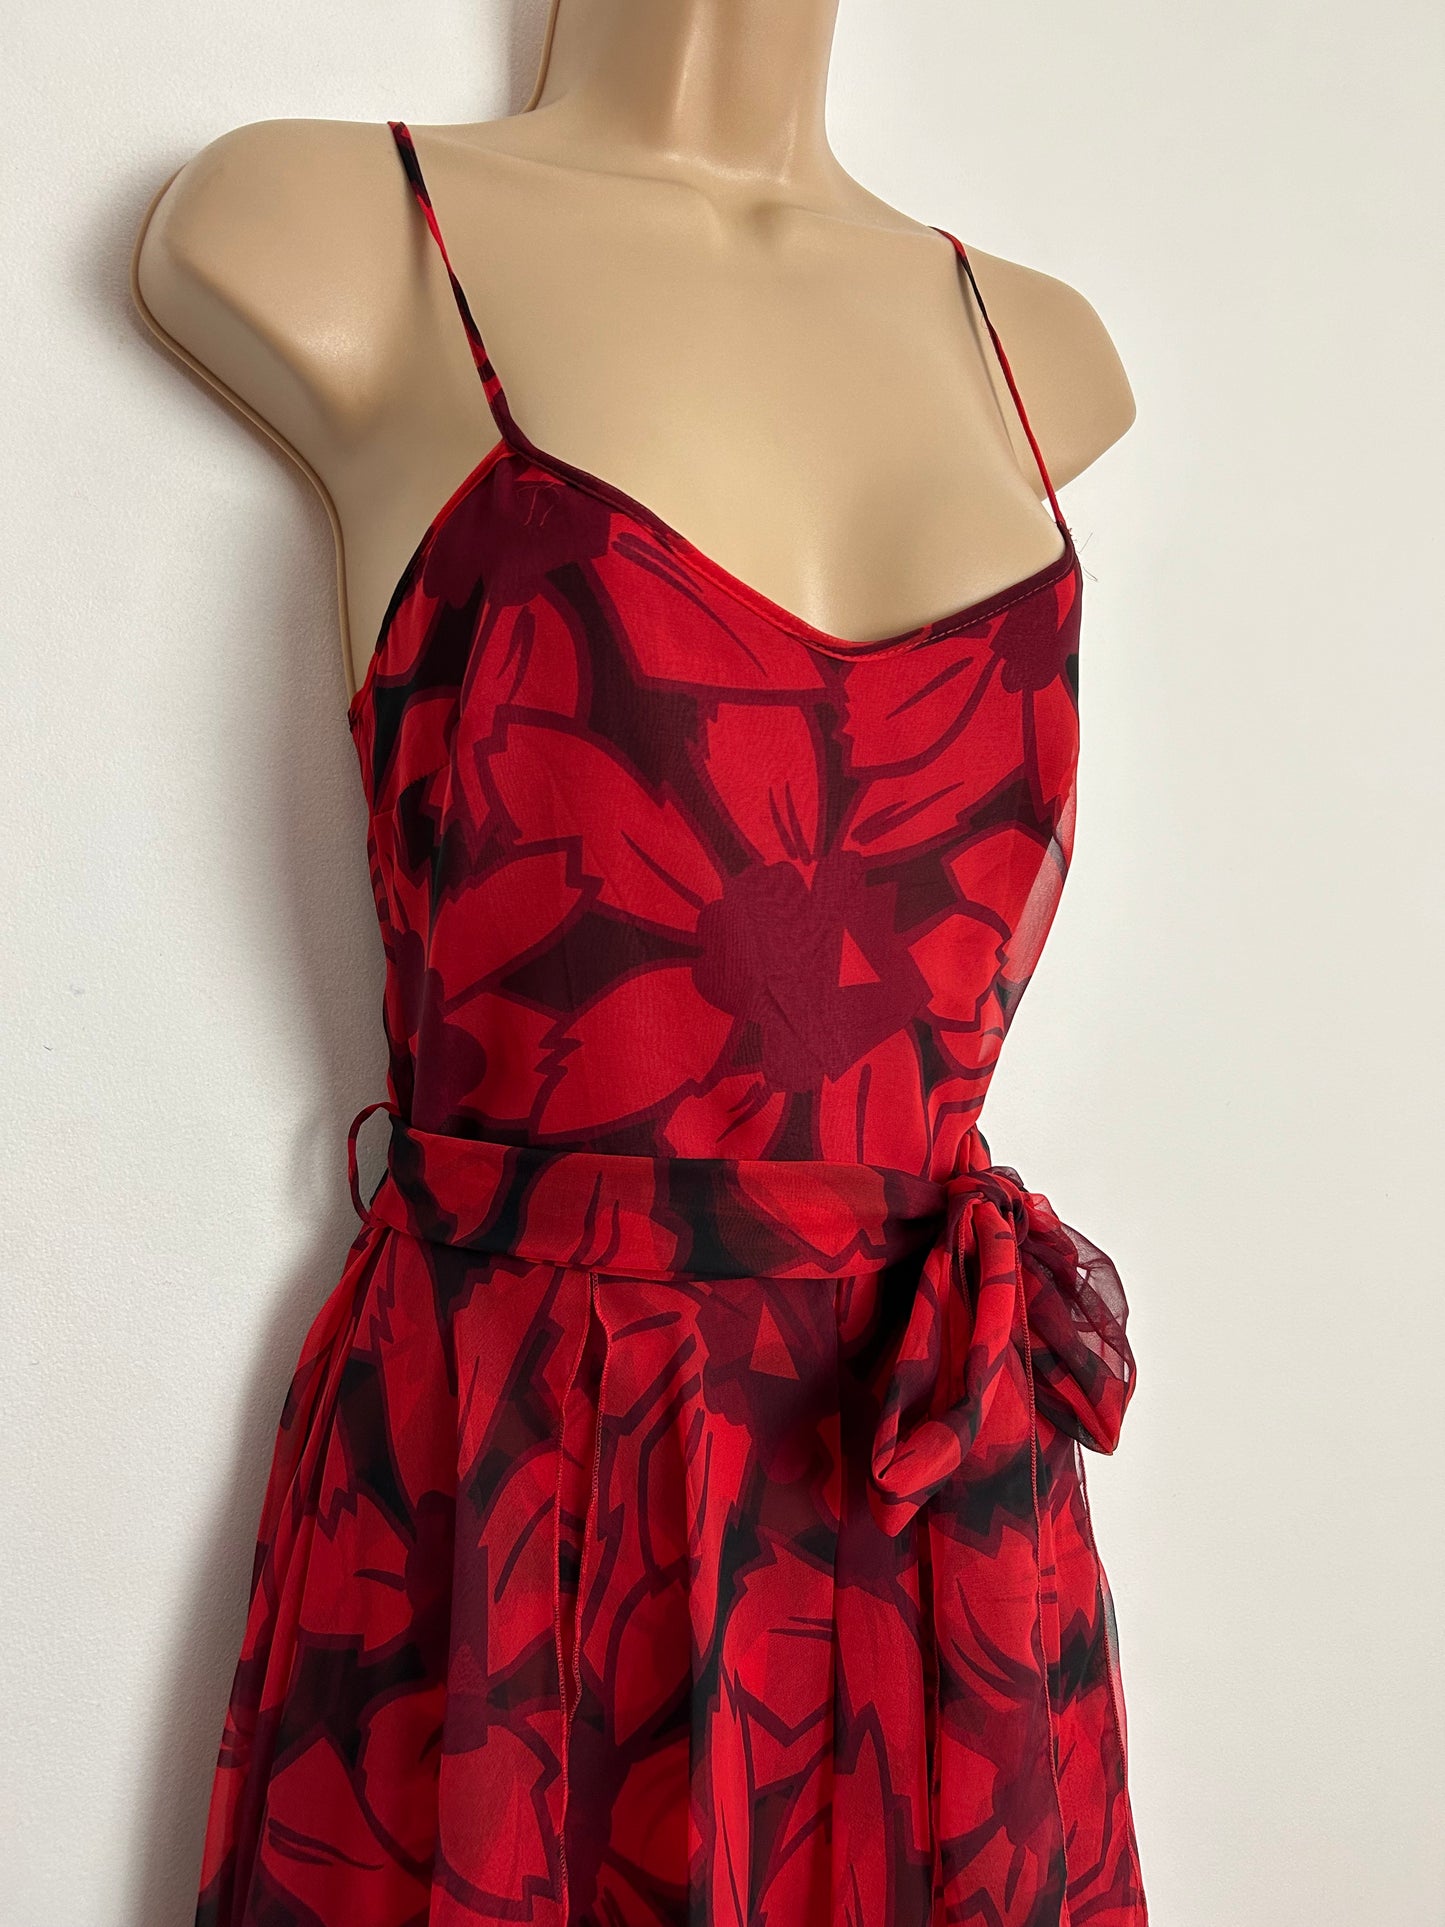 Vintage 1970s VERA MONT UK Size 6 Dark Red Abstract Floral Print Strappy Layered Summer Boho Maxi Dress